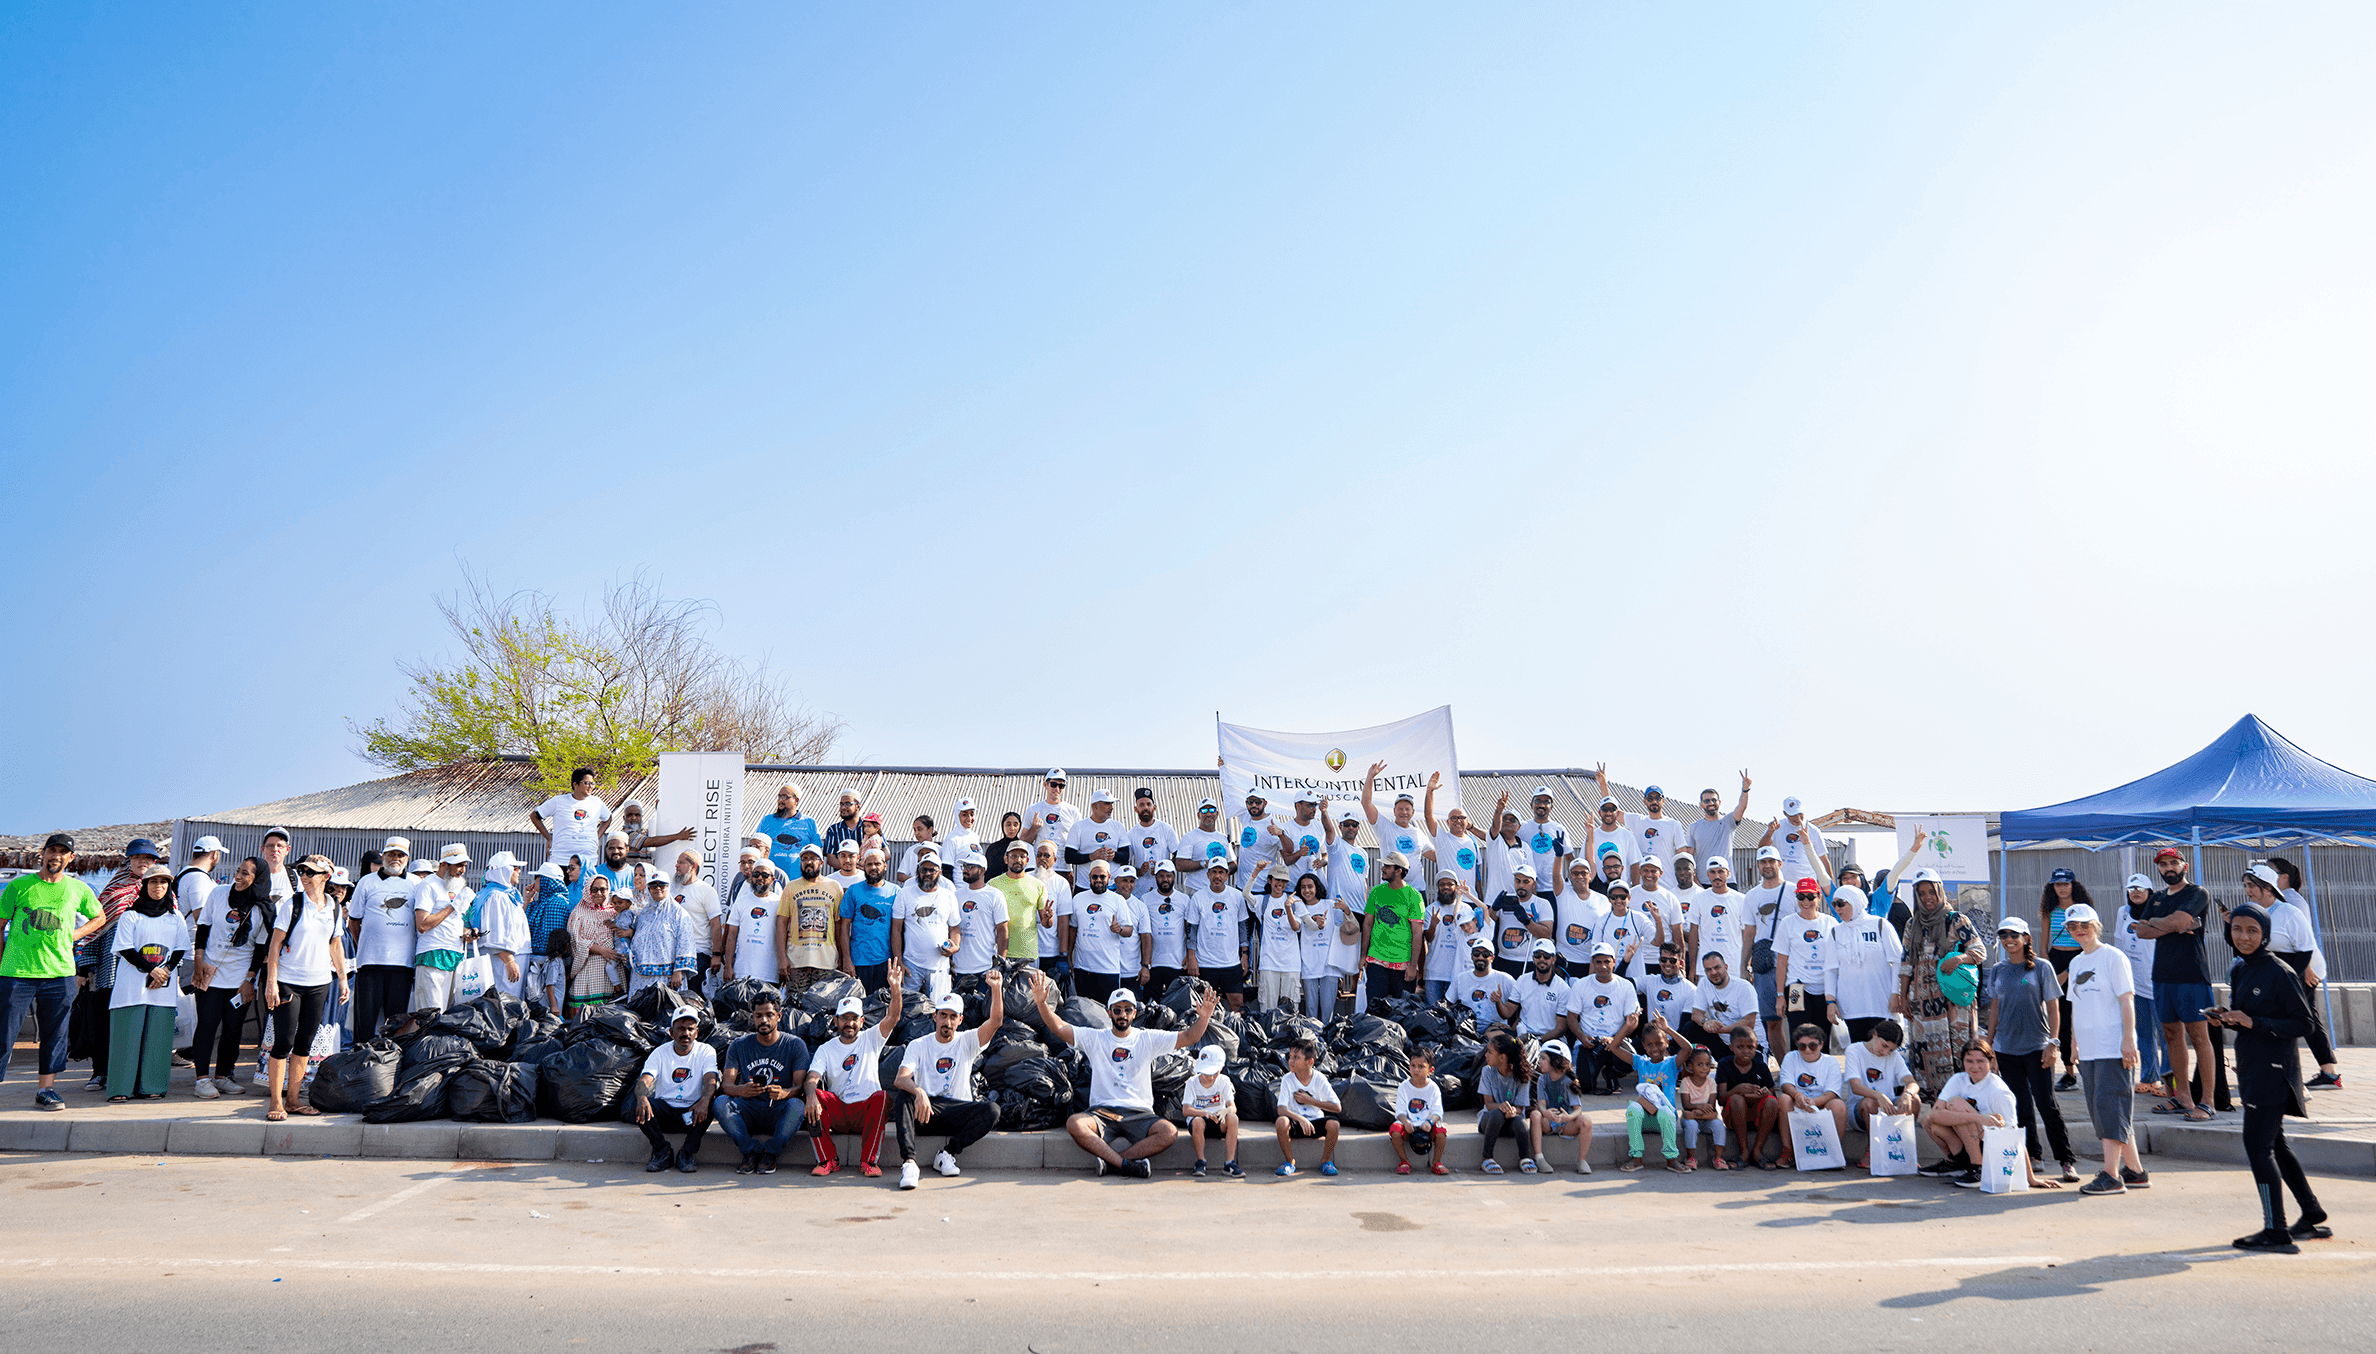 The beach cleanup took place, along Al Hail beach to mark World Cleanup Day.